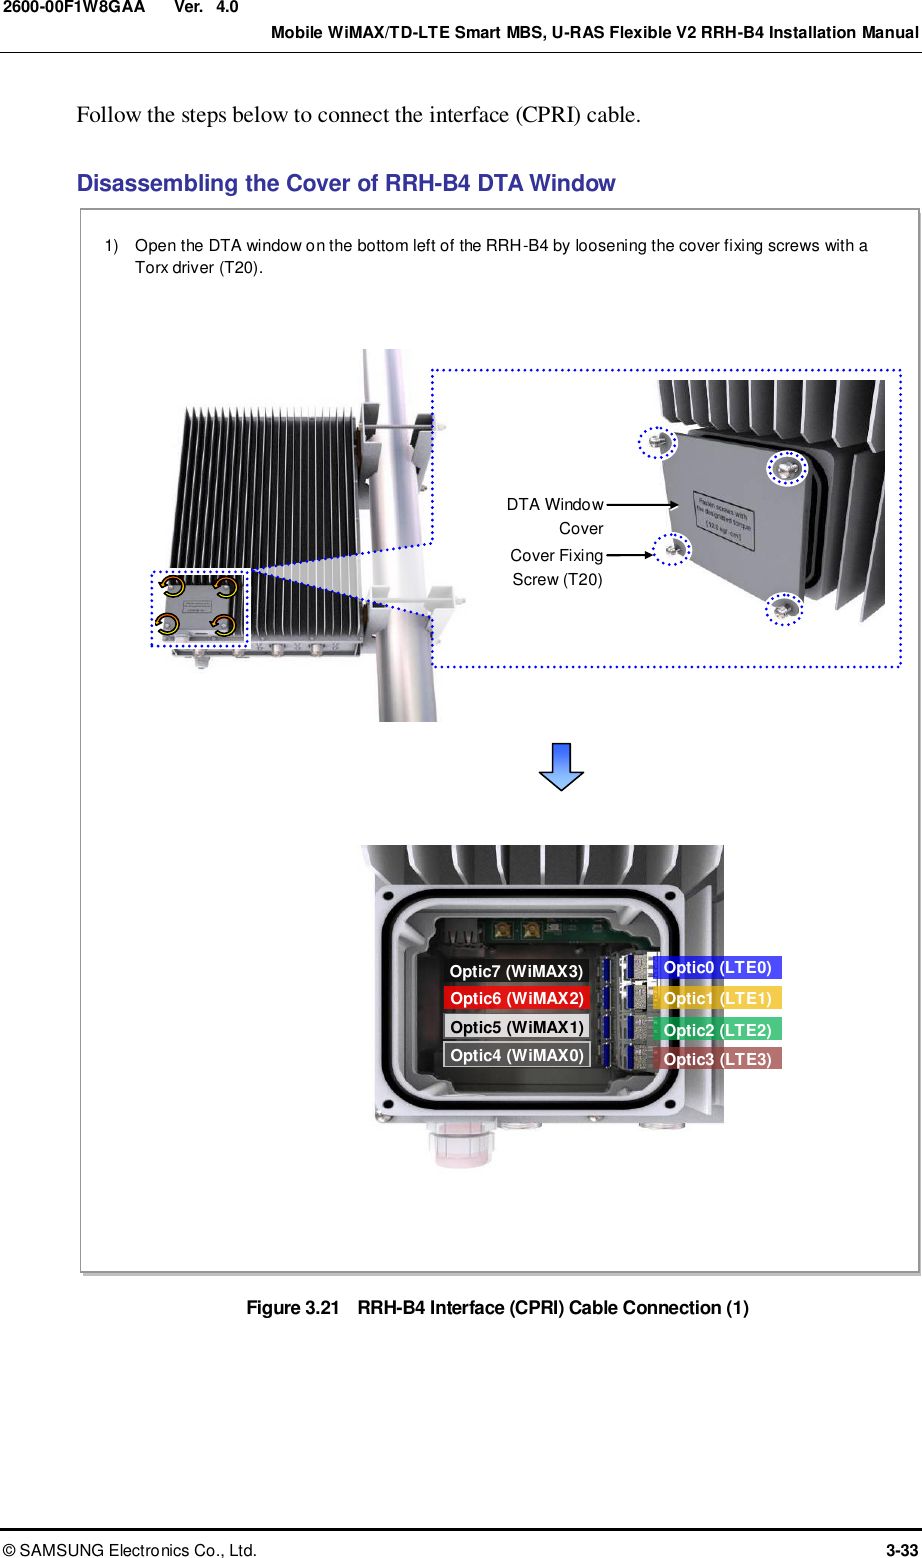  Ver.    Mobile WiMAX/TD-LTE Smart MBS, U-RAS Flexible V2 RRH-B4 Installation Manual ©  SAMSUNG Electronics Co., Ltd.  3-33 2600-00F1W8GAA 4.0 Follow the steps below to connect the interface (CPRI) cable.  Disassembling the Cover of RRH-B4 DTA Window Figure 3.21   RRH-B4 Interface (CPRI) Cable Connection (1)    1)    Open the DTA window on the bottom left of the RRH-B4 by loosening the cover fixing screws with a Torx driver (T20).  DTA Window Cover Cover Fixing     Screw (T20) Optic0 (LTE0) Optic1 (LTE1) Optic2 (LTE2) Optic3 (LTE3) Optic6 (WiMAX2) Optic5 (WiMAX1) Optic7 (WiMAX3) Optic4 (WiMAX0) 